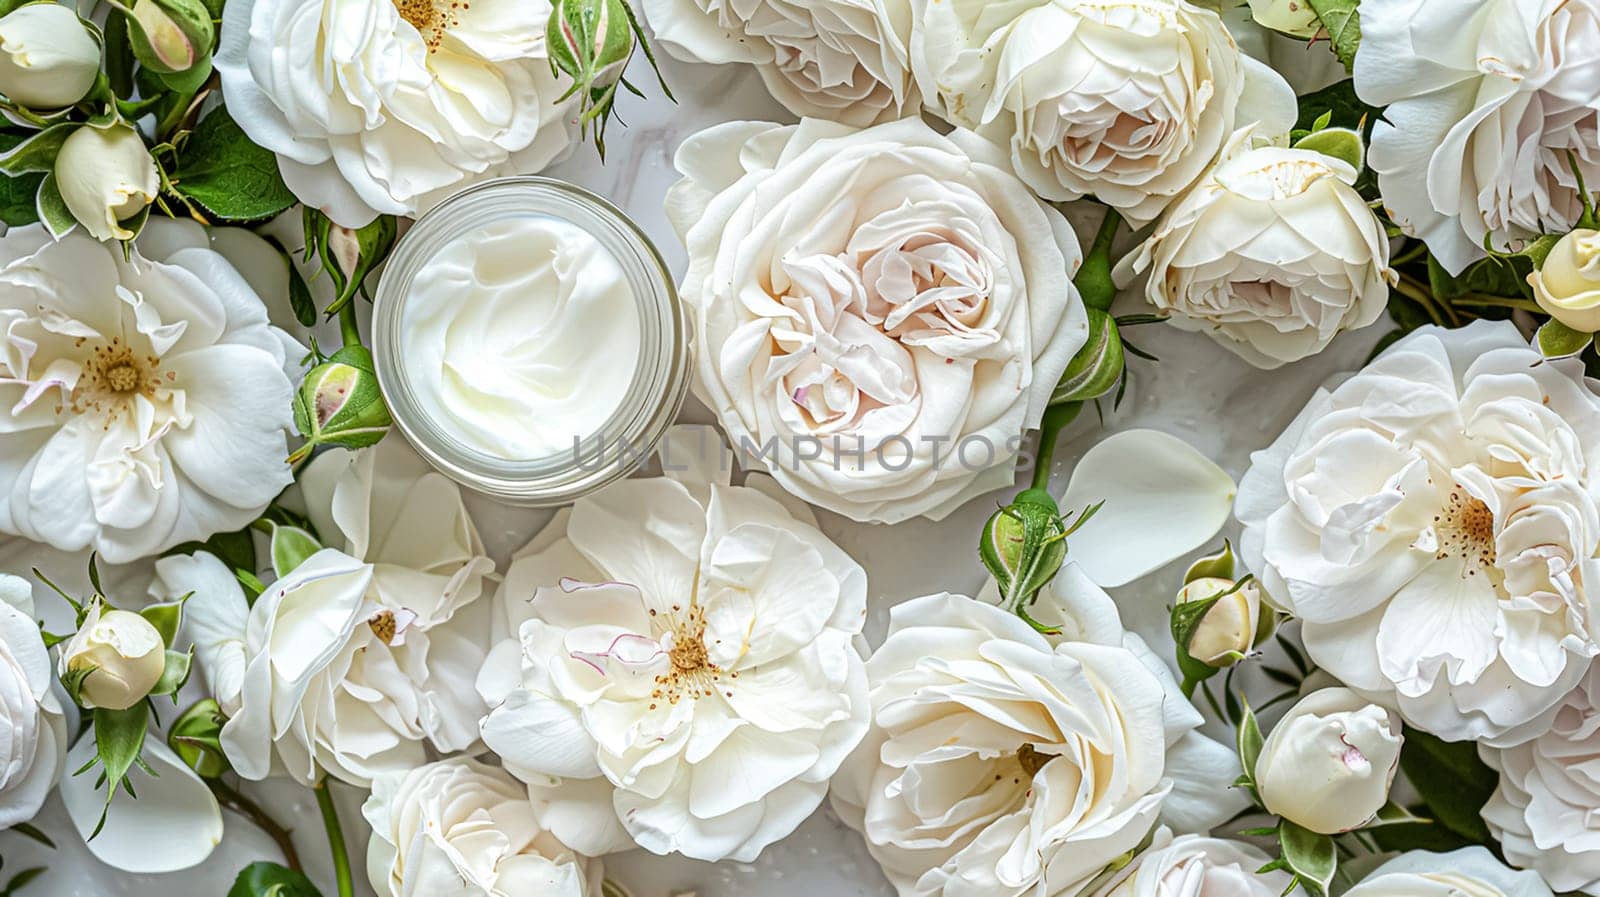 Face cream moisturiser as skincare and bodycare product with flowers background, spa and organic beauty cosmetics for natural skin care routine